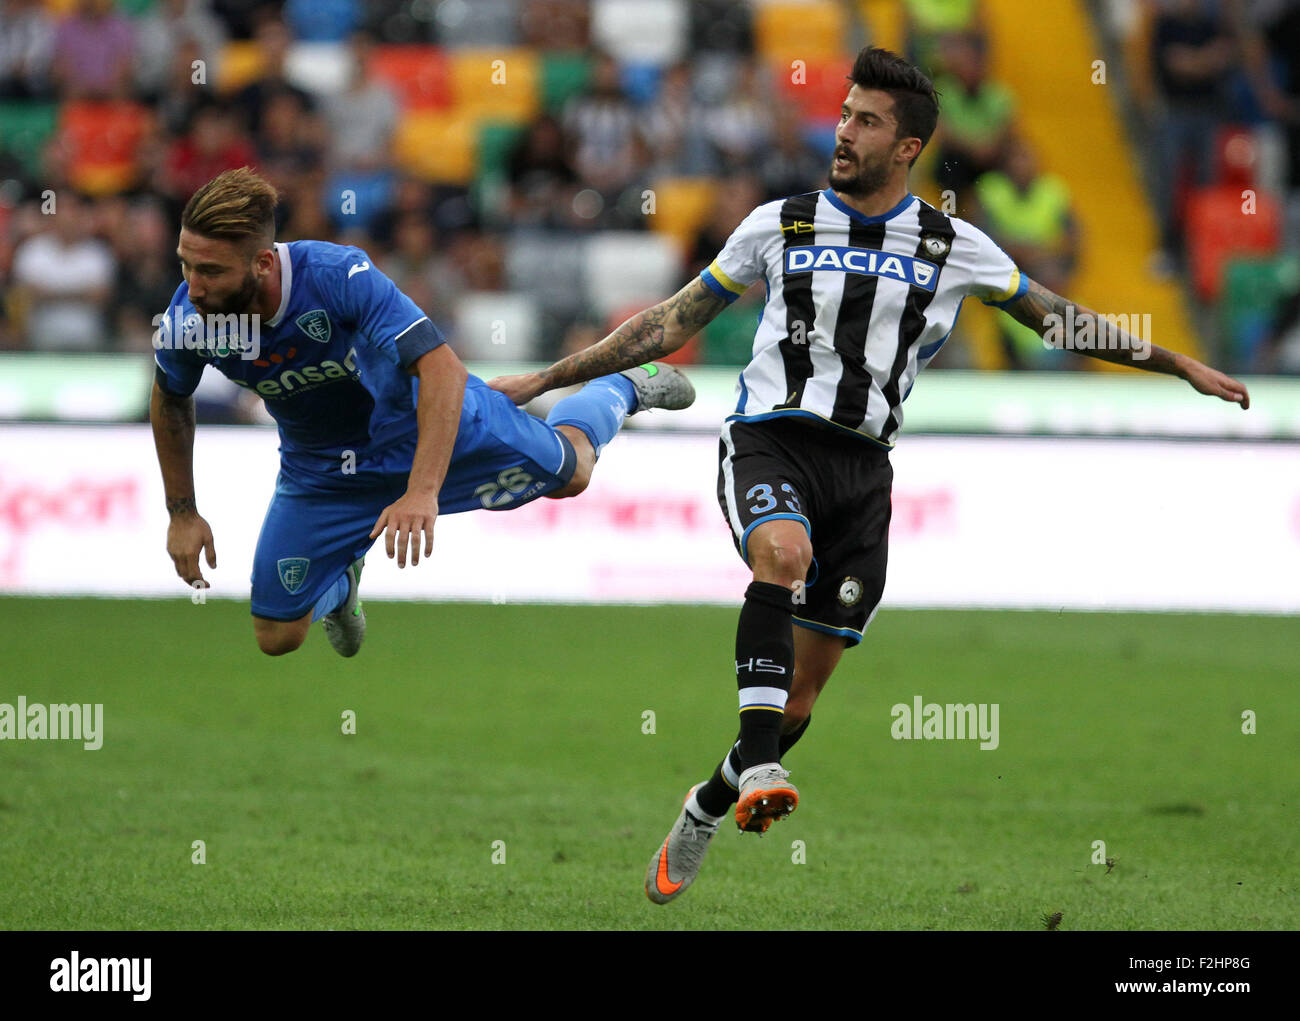 Udine, Italy. 19th September, 2015. Udinese's midfielder Panagiotis Giorgios Kone (R) fights for the ball with Empoli's defender Lorenzo Tonelli during the Italian Serie A football match between Udinese Calcio v Empoli at Friuli Stadium on 19 September, 2015 in Udine. Credit:  Andrea Spinelli/Alamy Live News Stock Photo